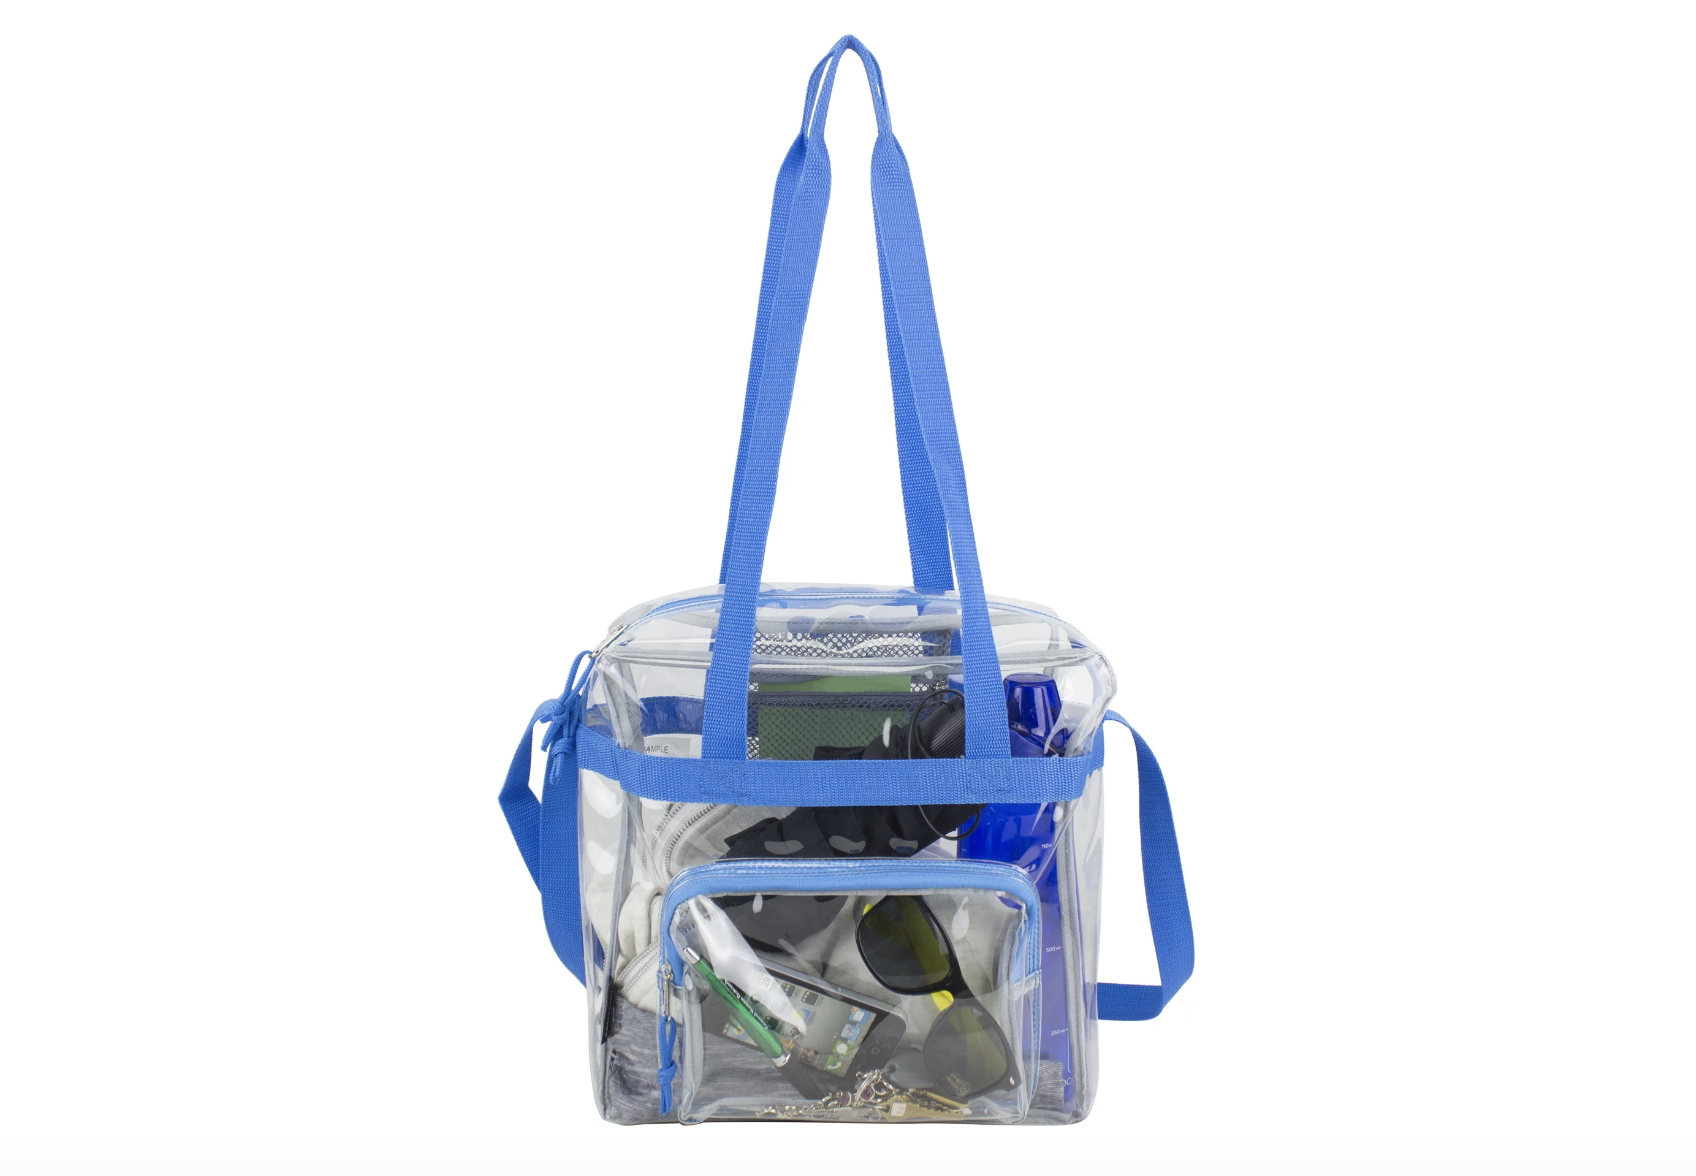 Eastsport Unisex Clear Stadium Approved Tote